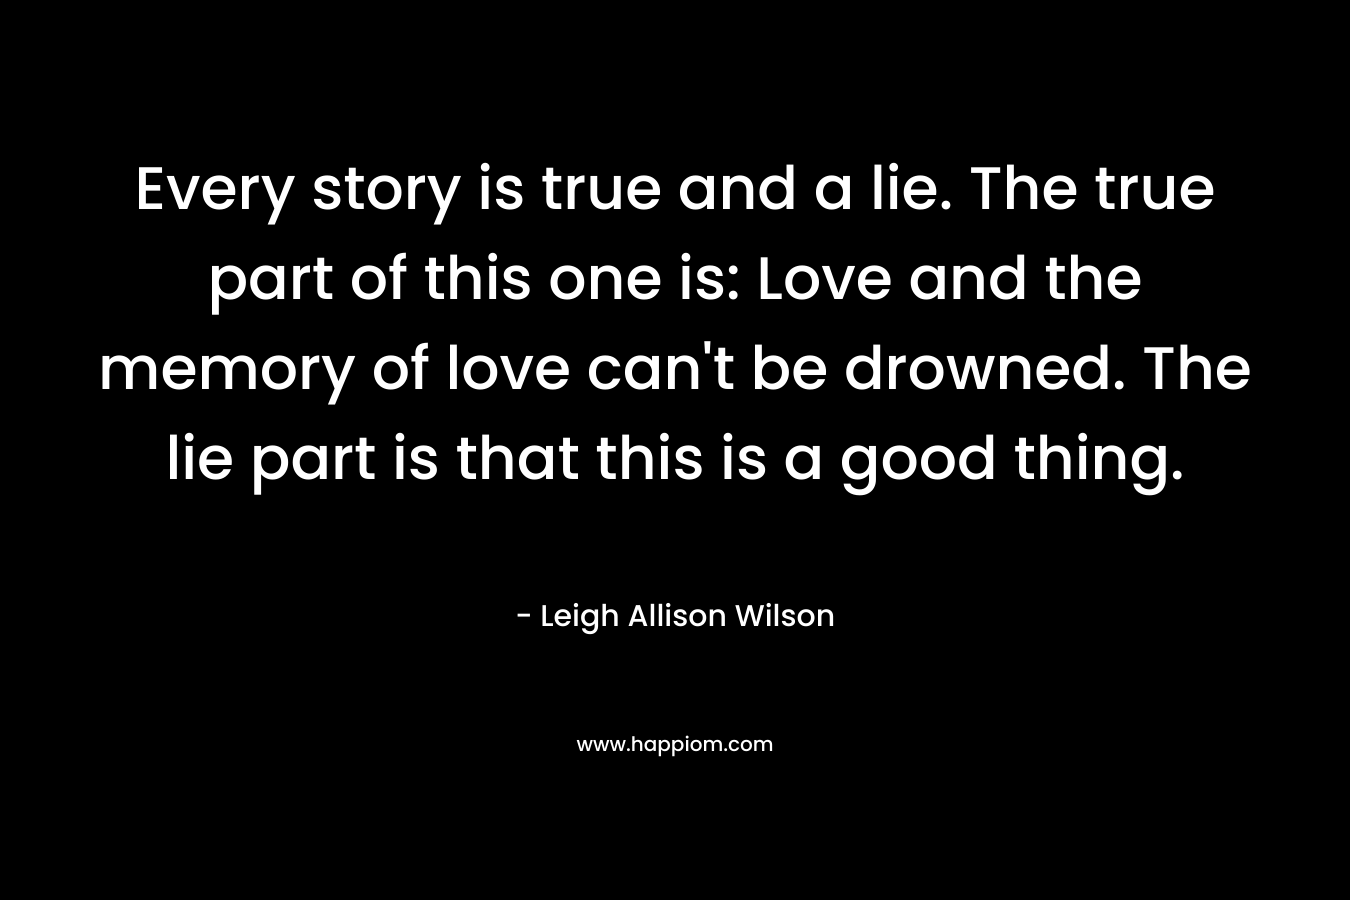 Every story is true and a lie. The true part of this one is: Love and the memory of love can't be drowned. The lie part is that this is a good thing.